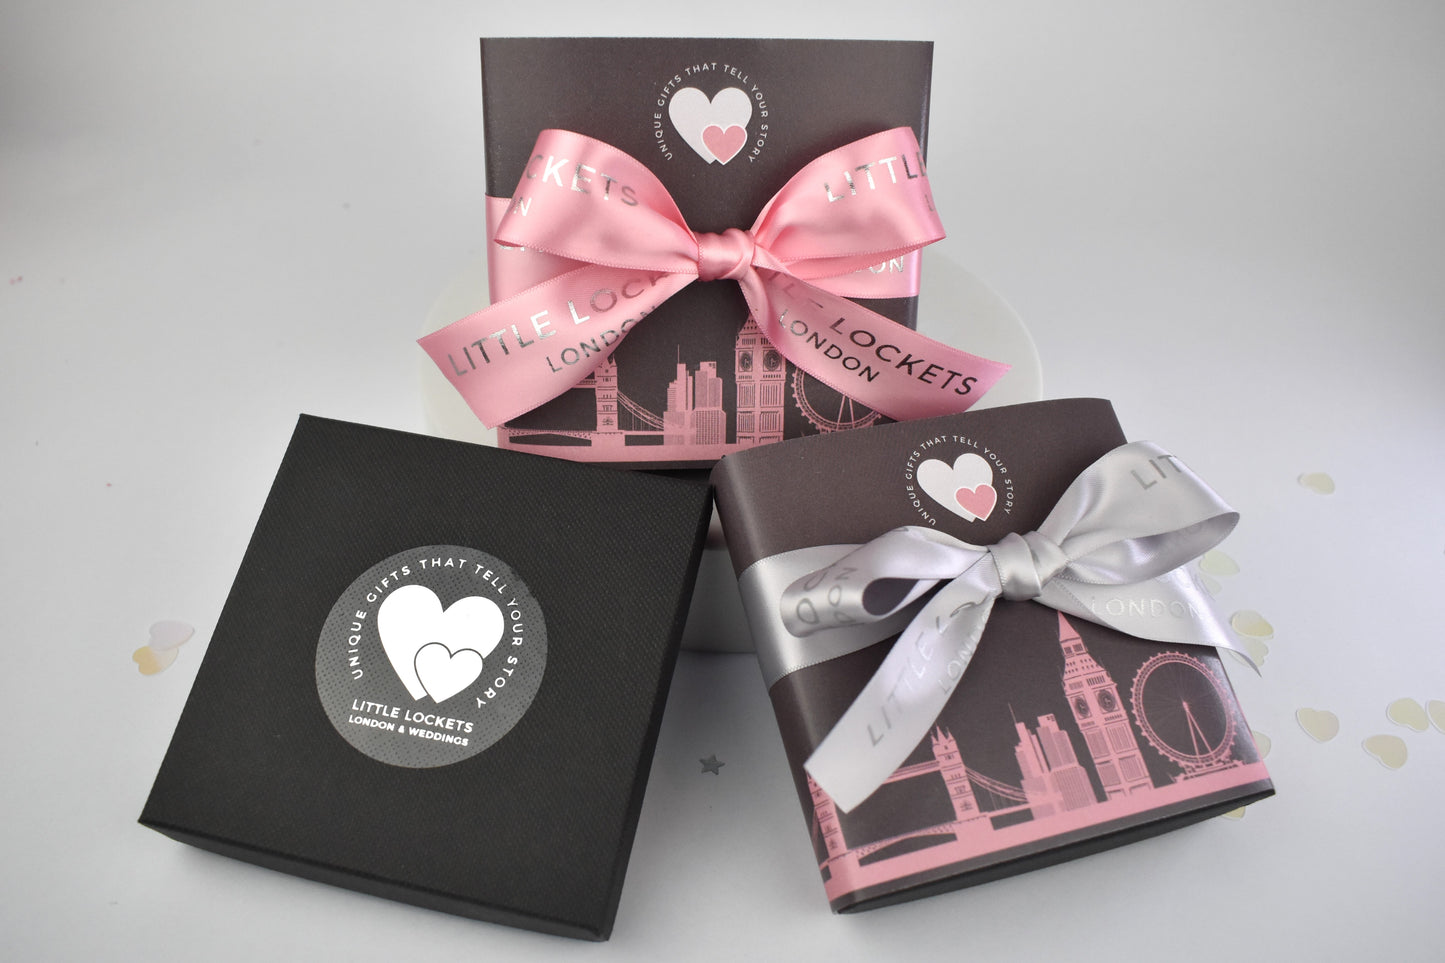 Your gift will arrive in a branded gift box or you can choose to upgrade to a London skyline wrap with pink or grey ribbon tie.